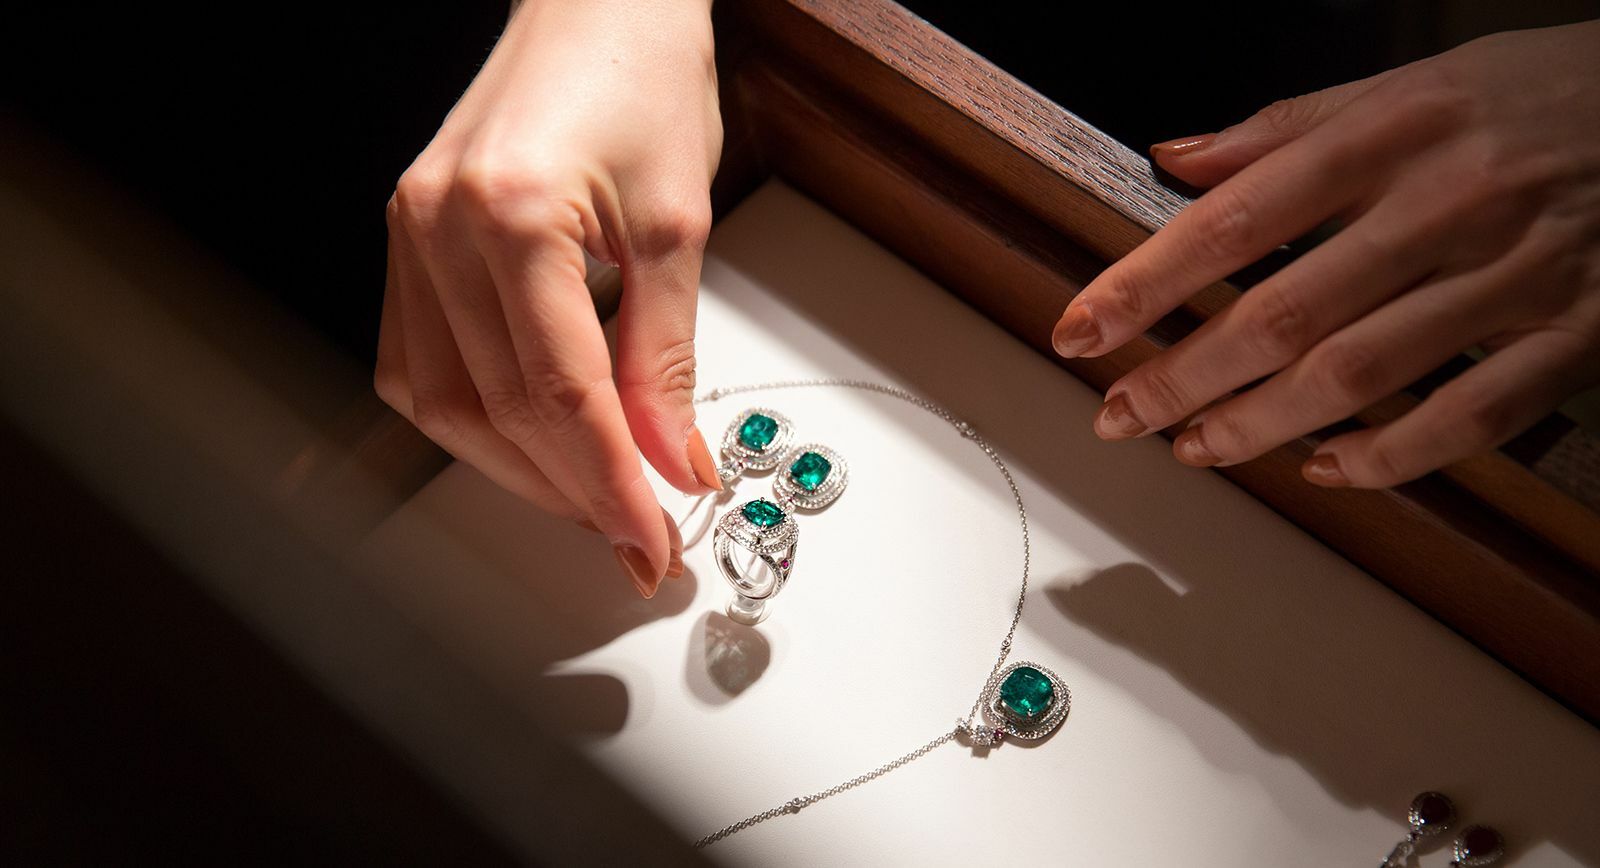 Gübelin: The charm of the Burmese ruby at the ‘Magical Journey to Burma’ event